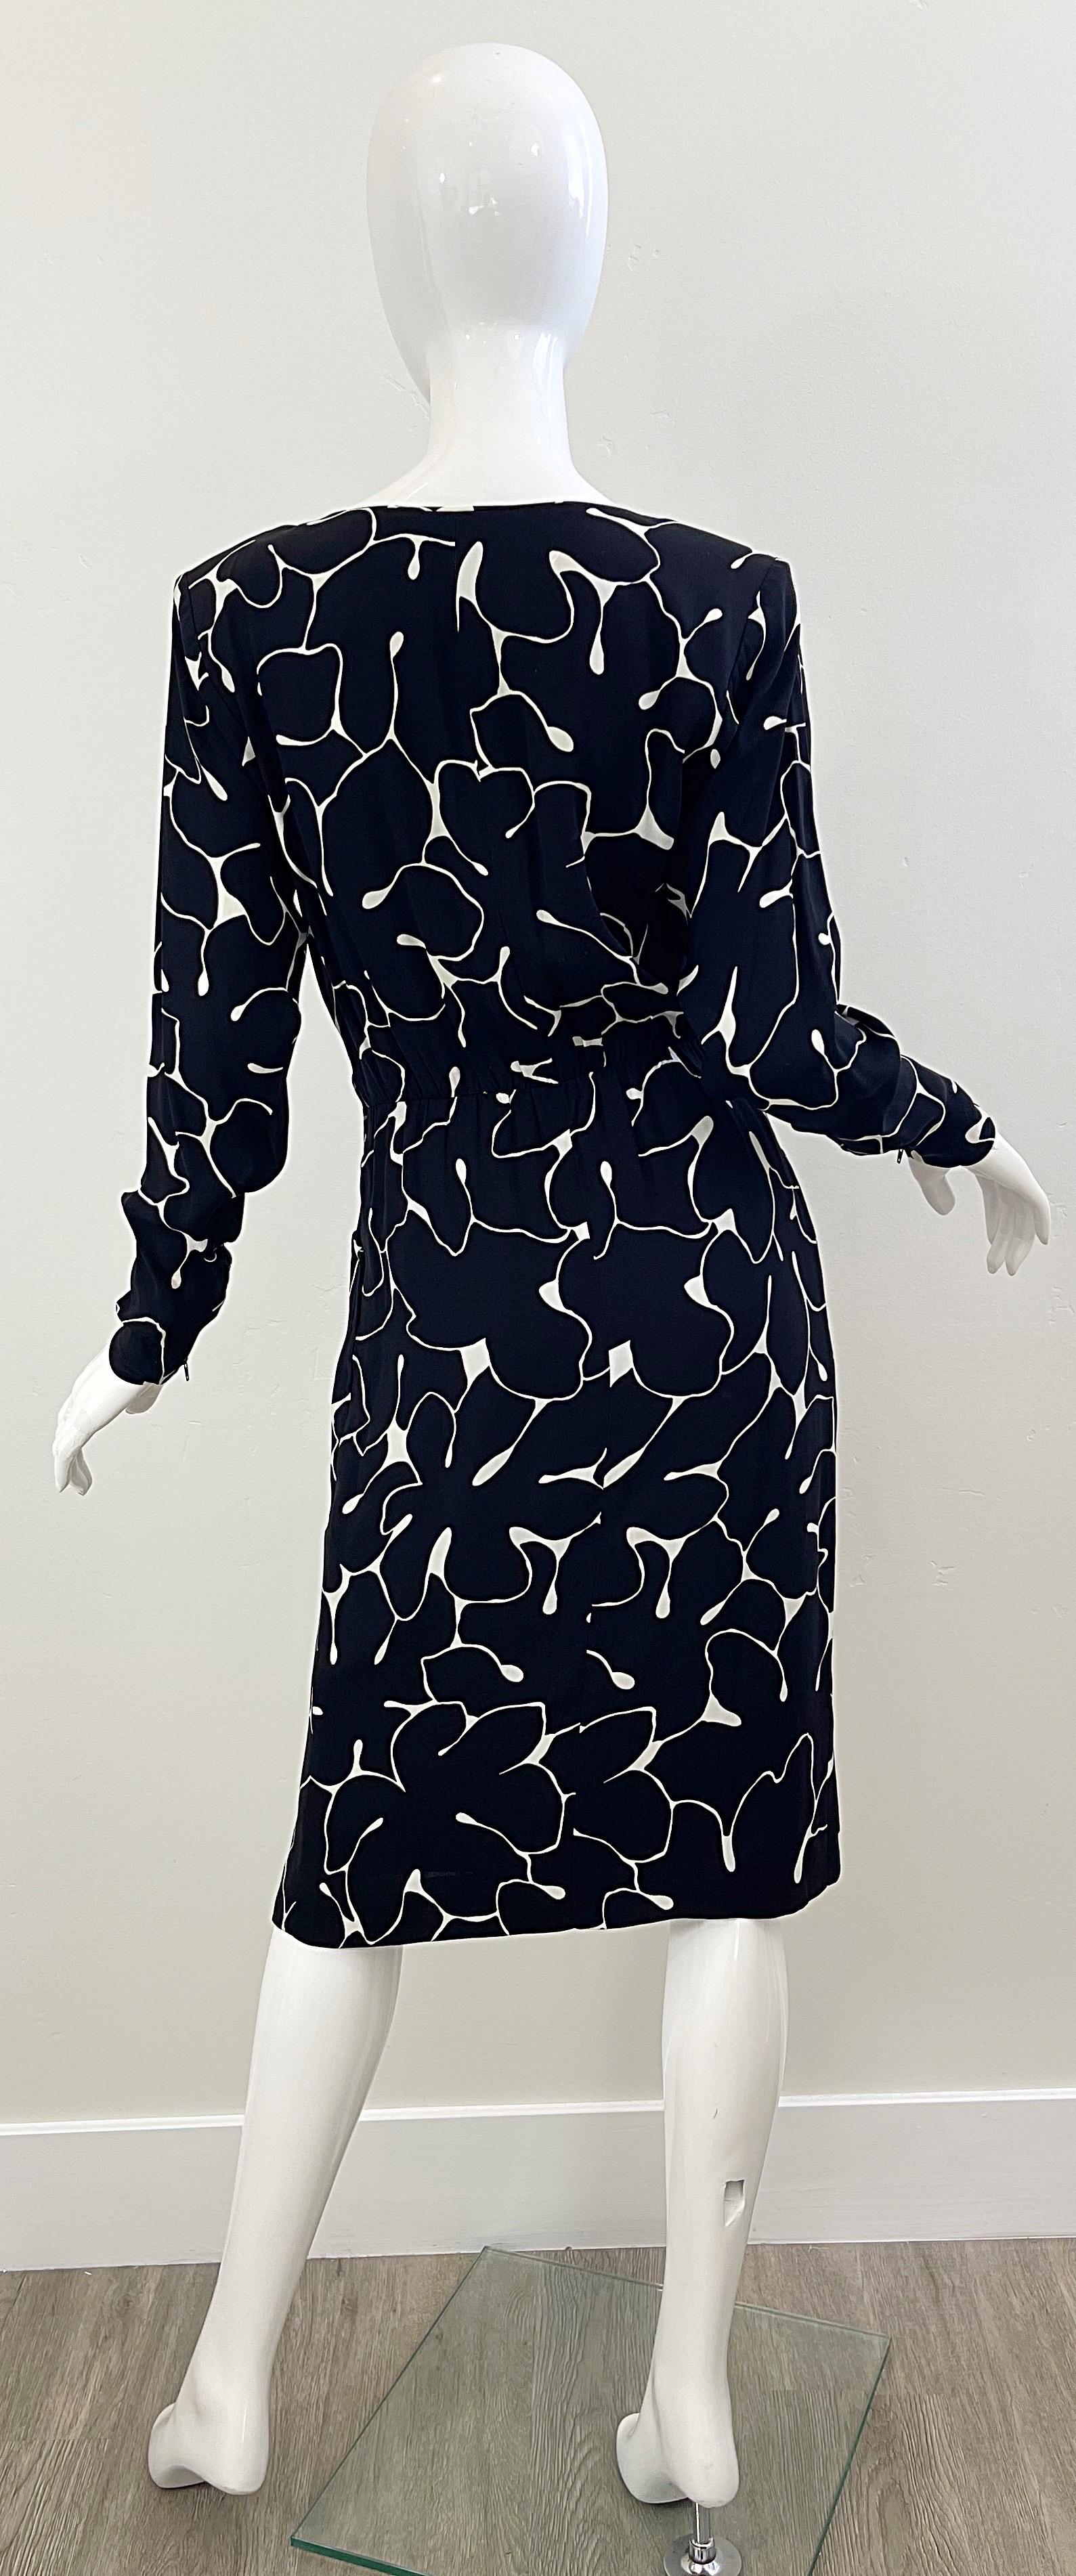 Yves Saint Laurent 1980s Black and White Abstract Flower Print Silk Crepe Dress For Sale 7